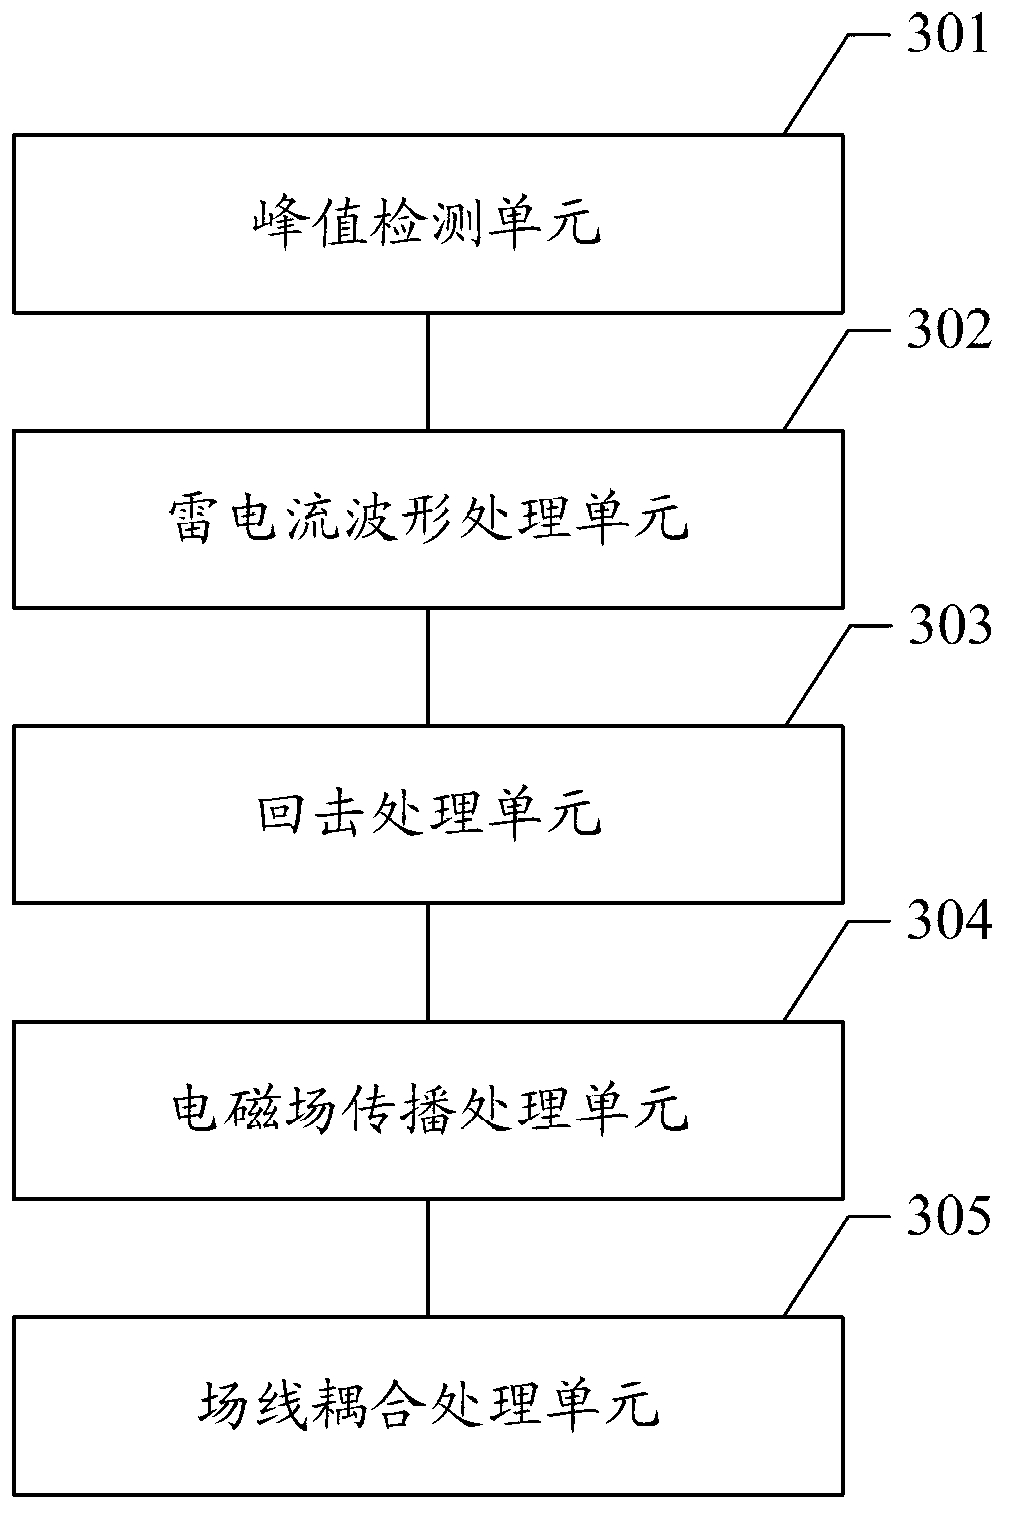 Lightning induction voltage determining method and system on distributing lines